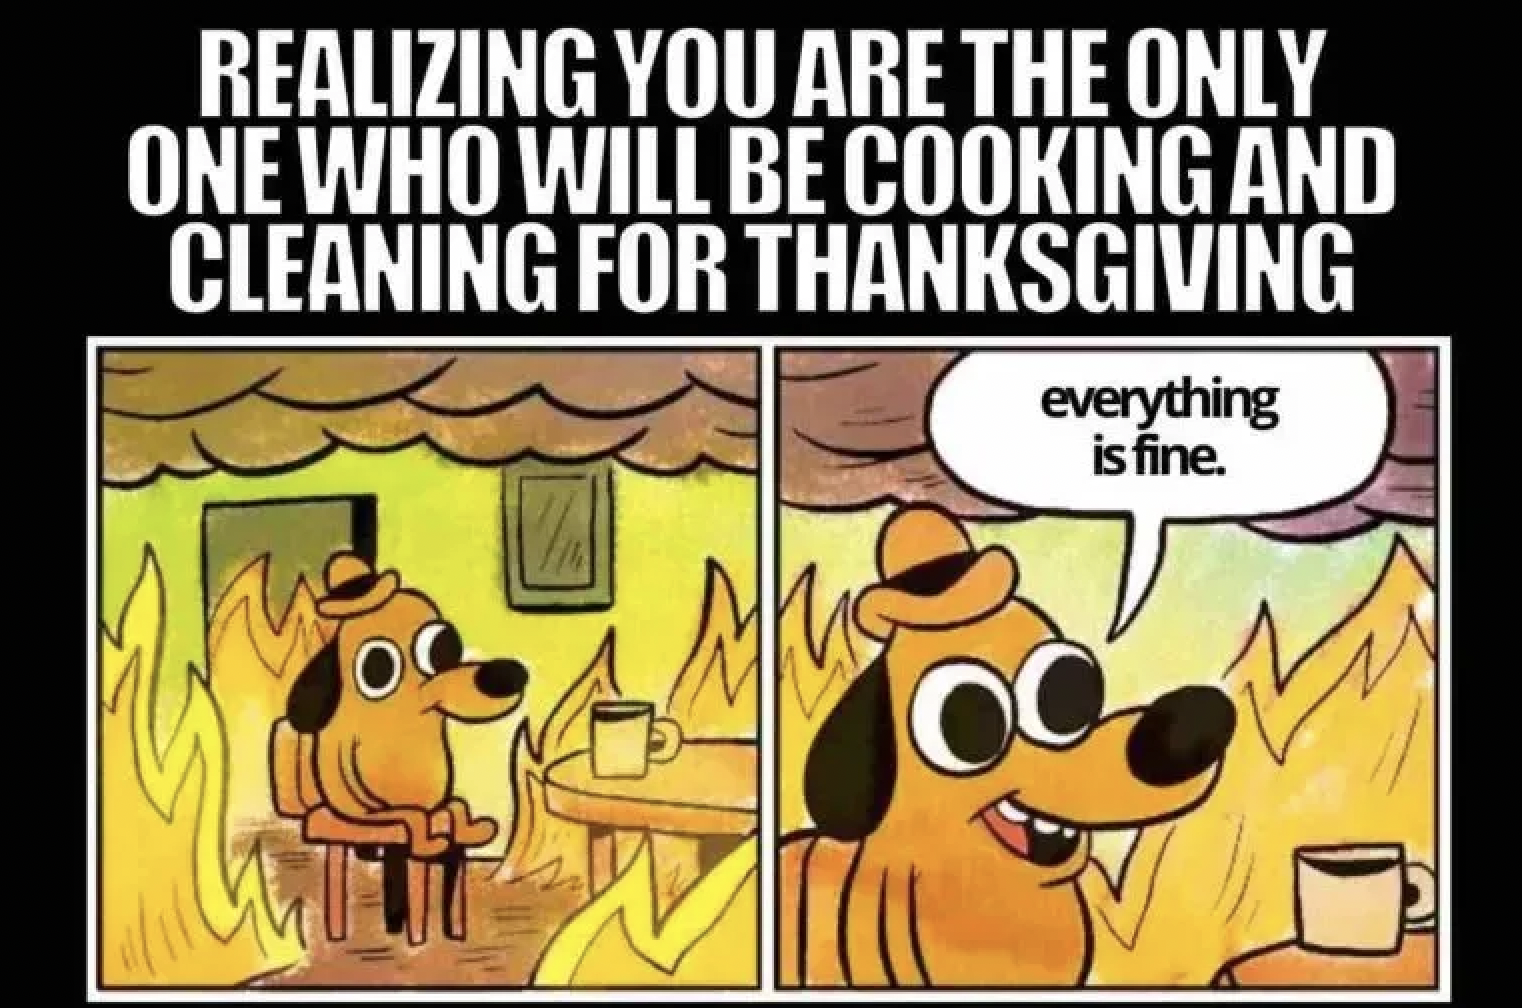 comics - Realizing You Are The Only One Who Will Be Cooking And Cleaning For Thanksgiving Vi everything is fine. Oc